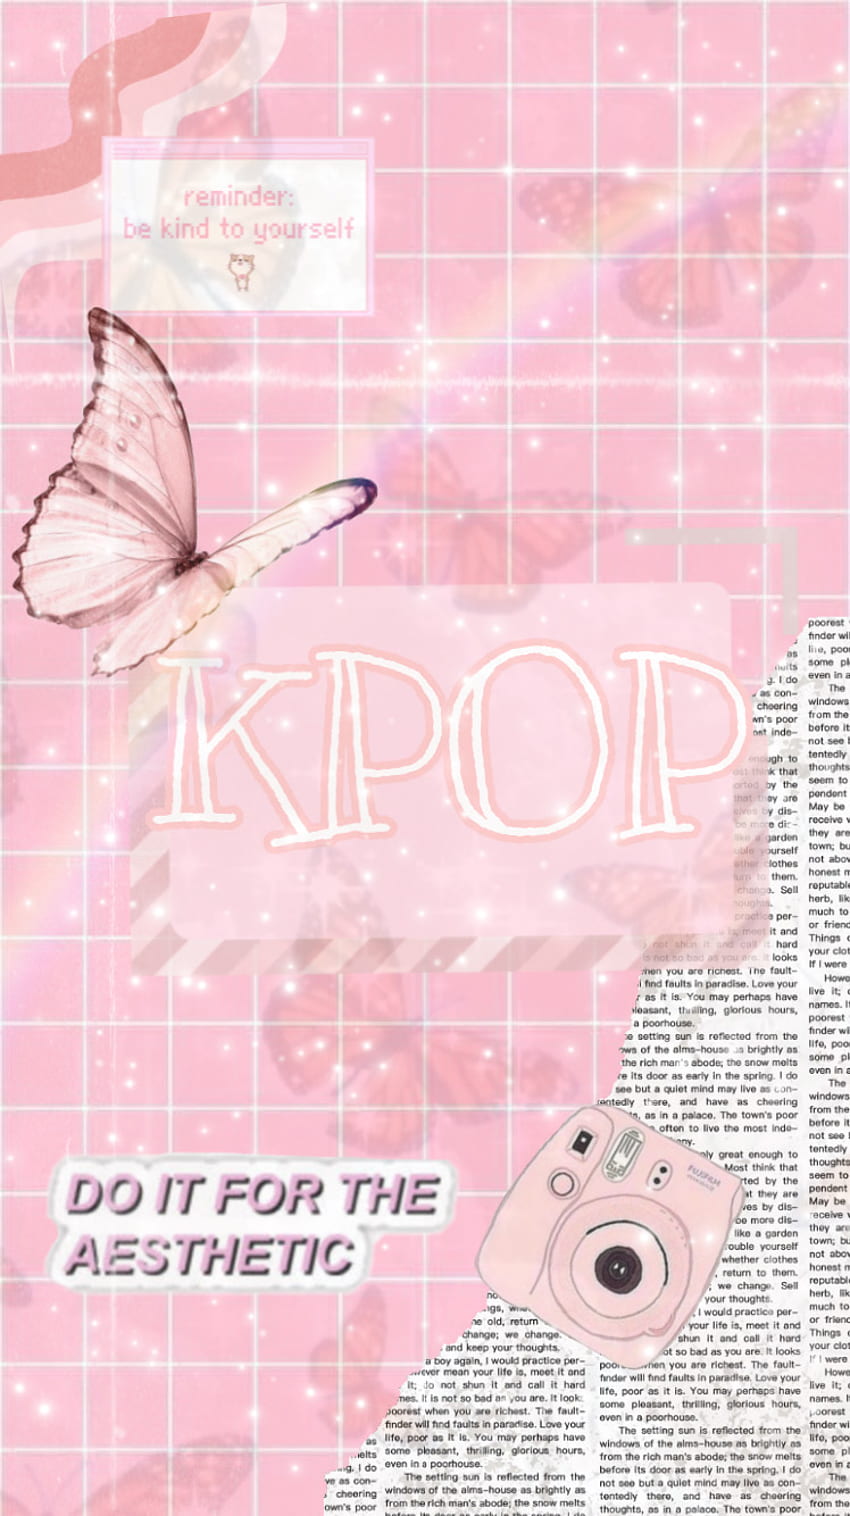 1366x768px, 720P Free download | kpop Aesthetic pink kpop by K•P•O•P HD